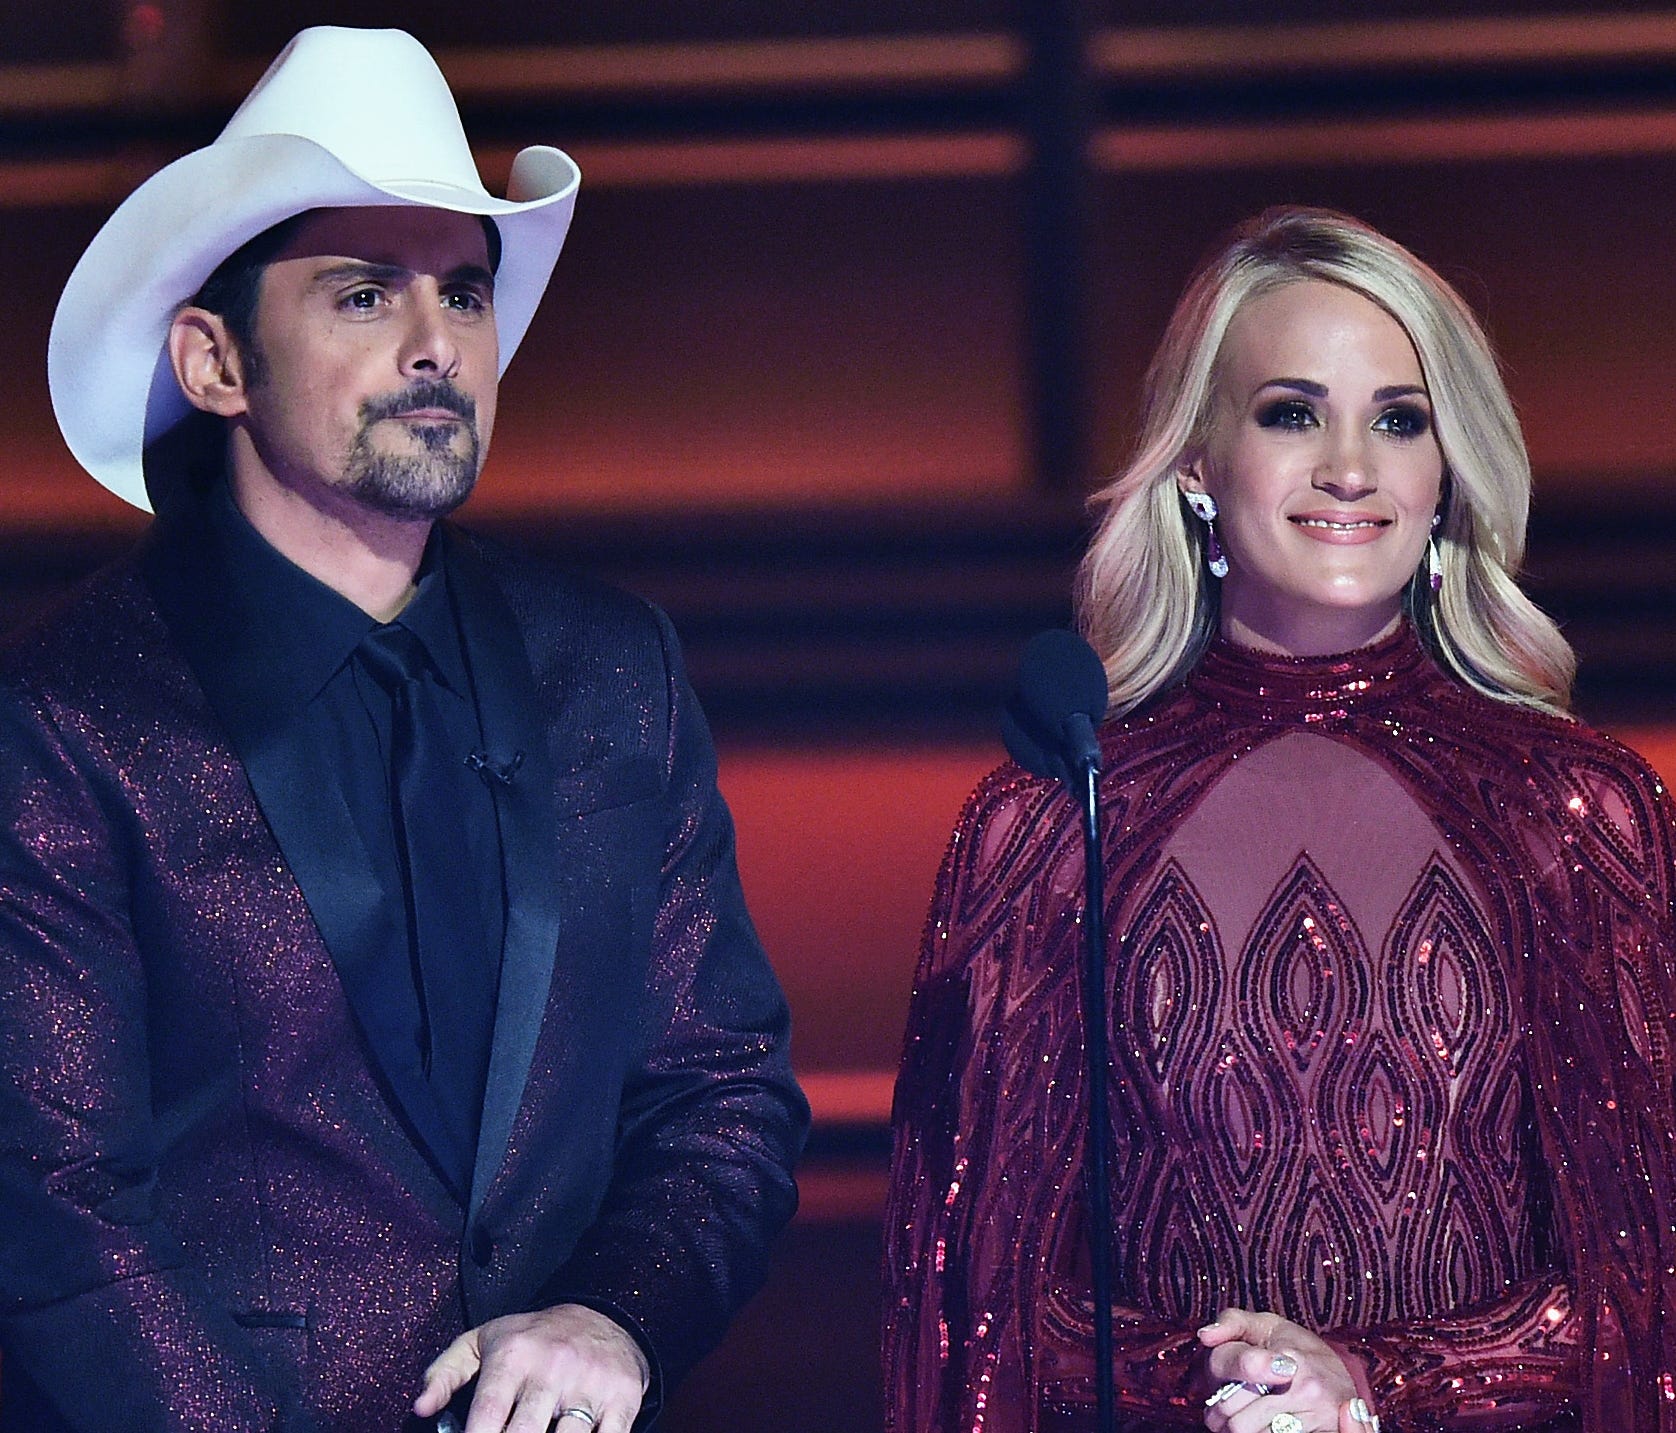 Co-hosts Brad Paisley and Carrie Underwood started the Country Music Association Awards with a pointed political parody.